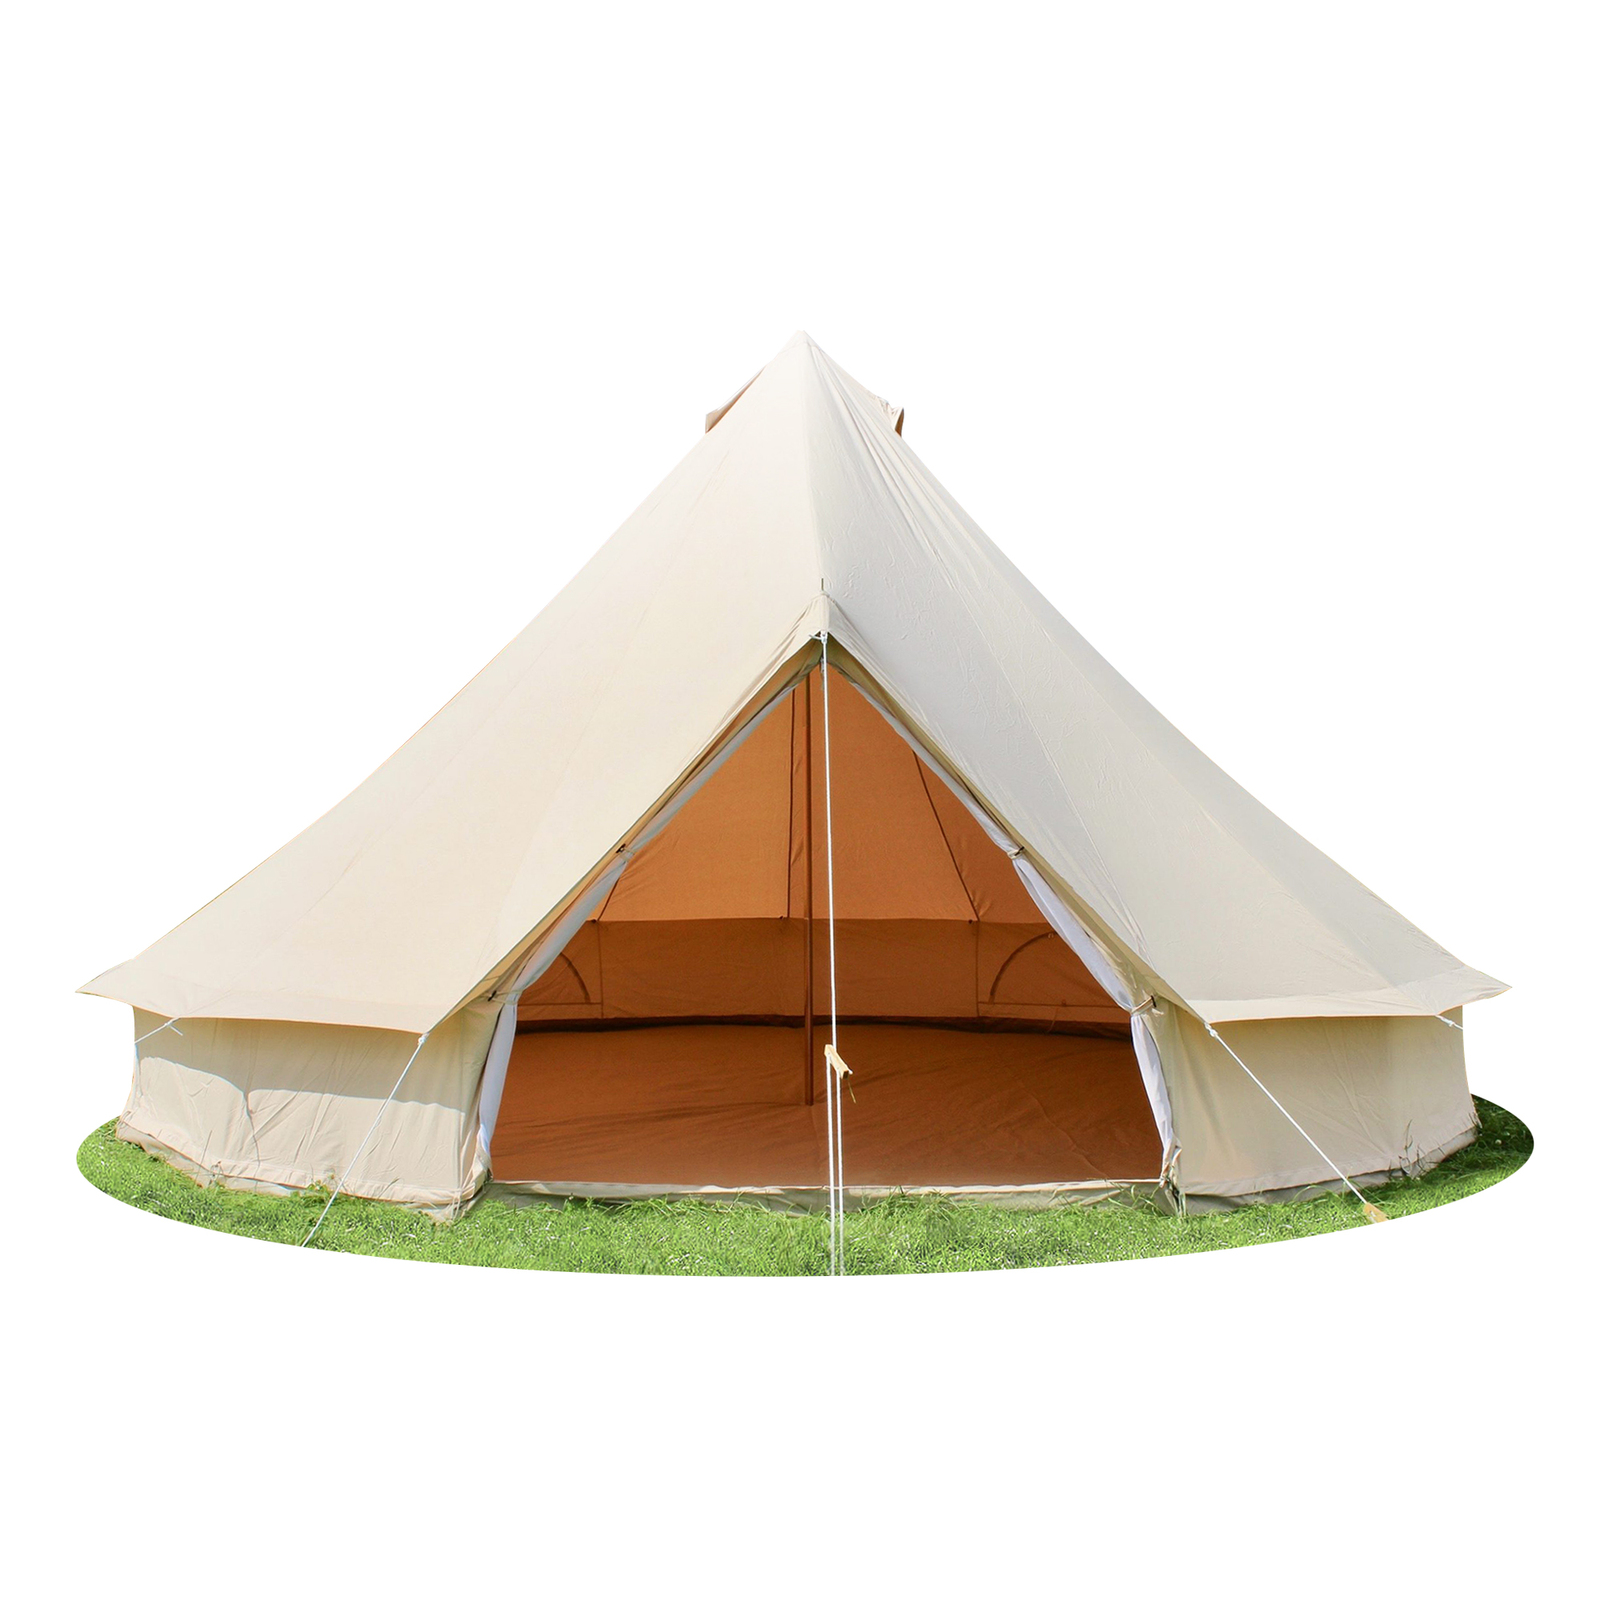 6M 4-Season Bell Tent Waterproof Canvas Glamping Yurt Teepee Tents Commercial Grade Belltent